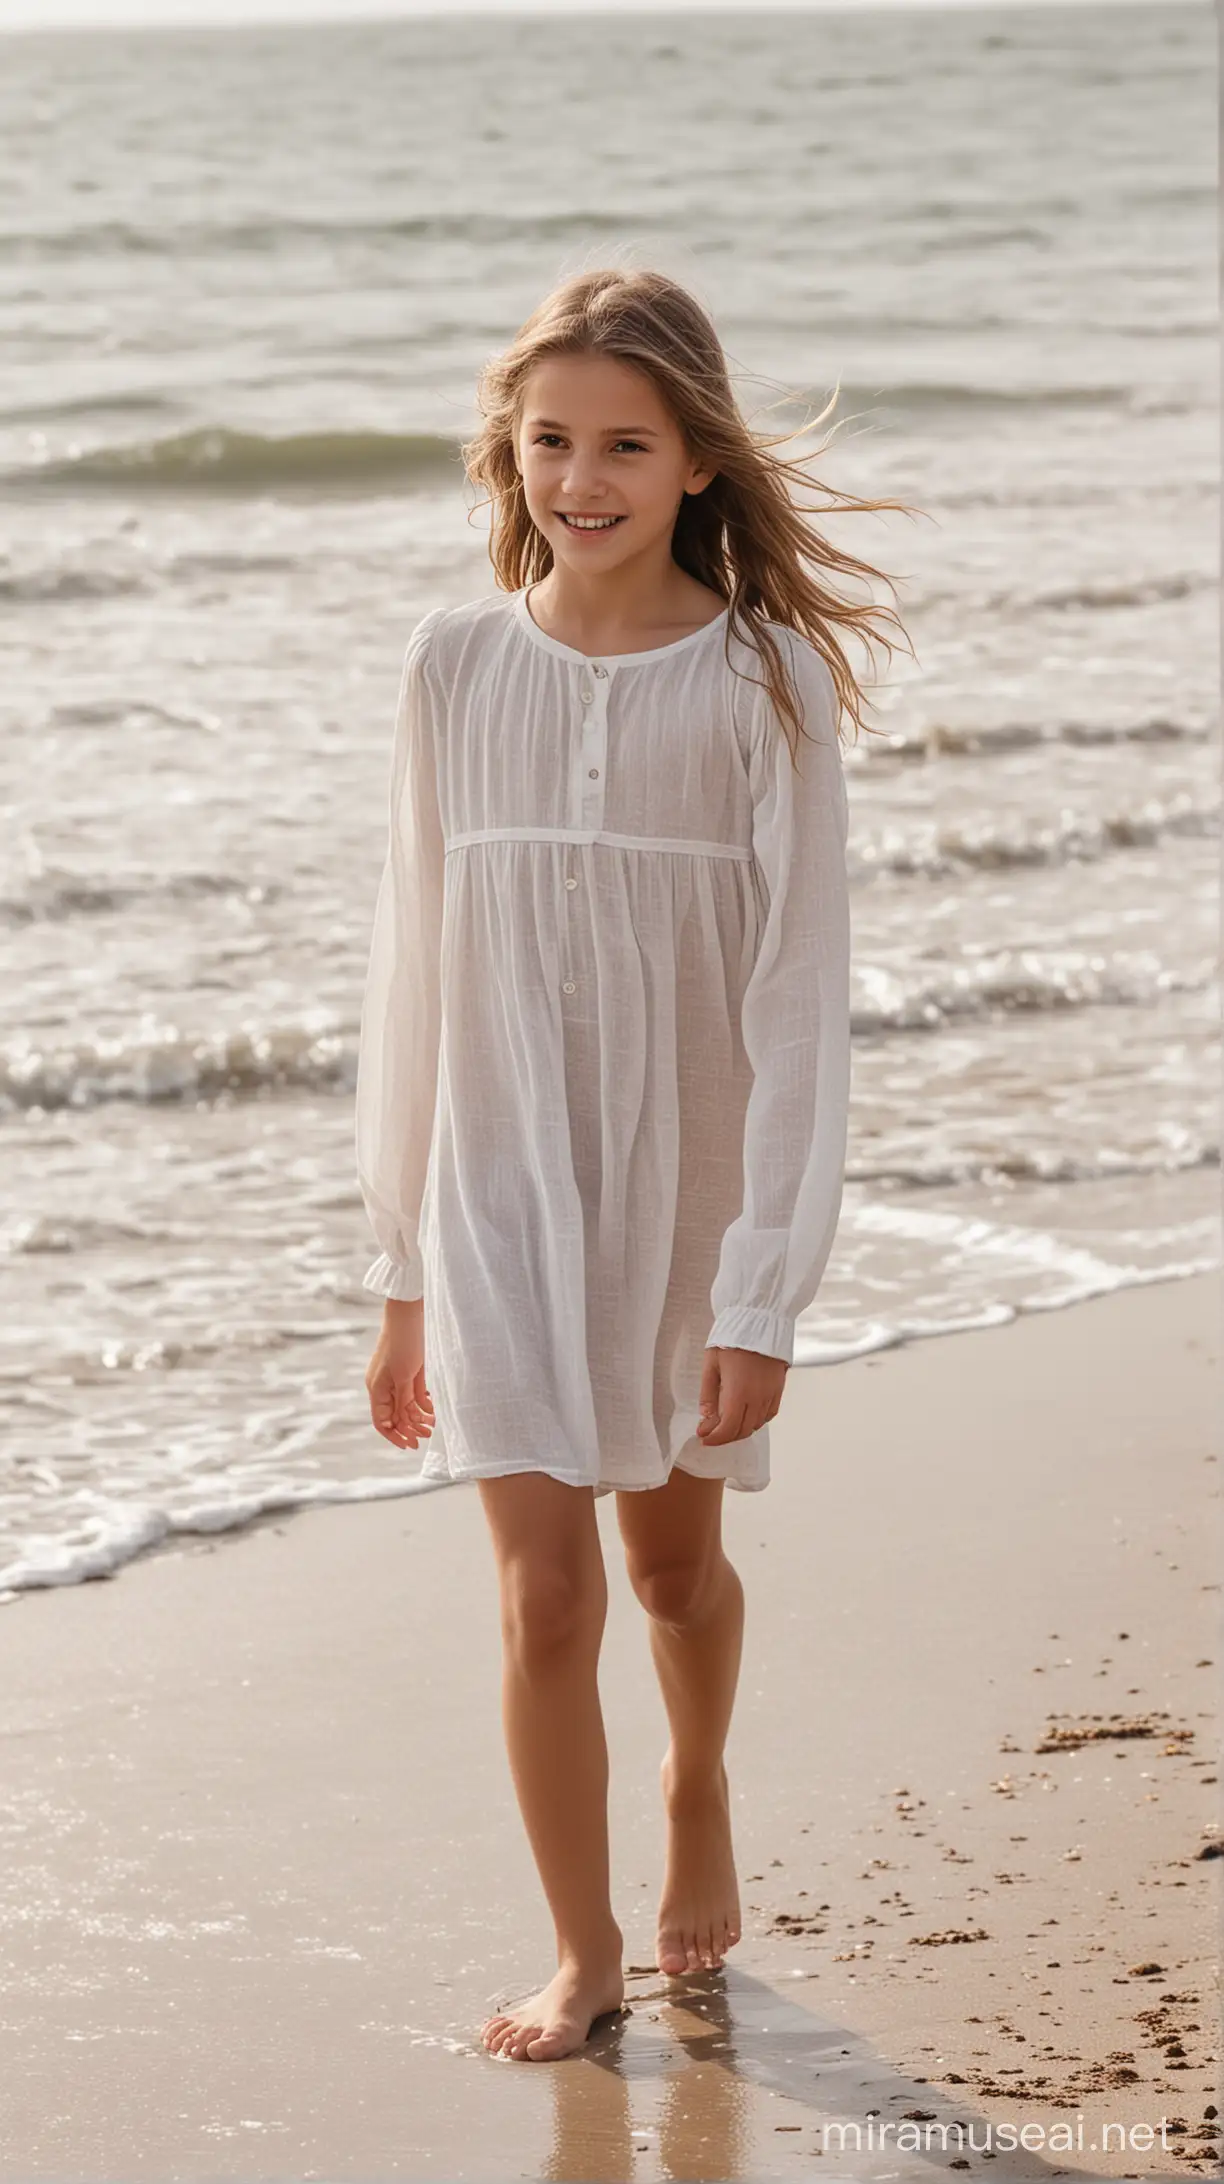 young girl walking on a beach